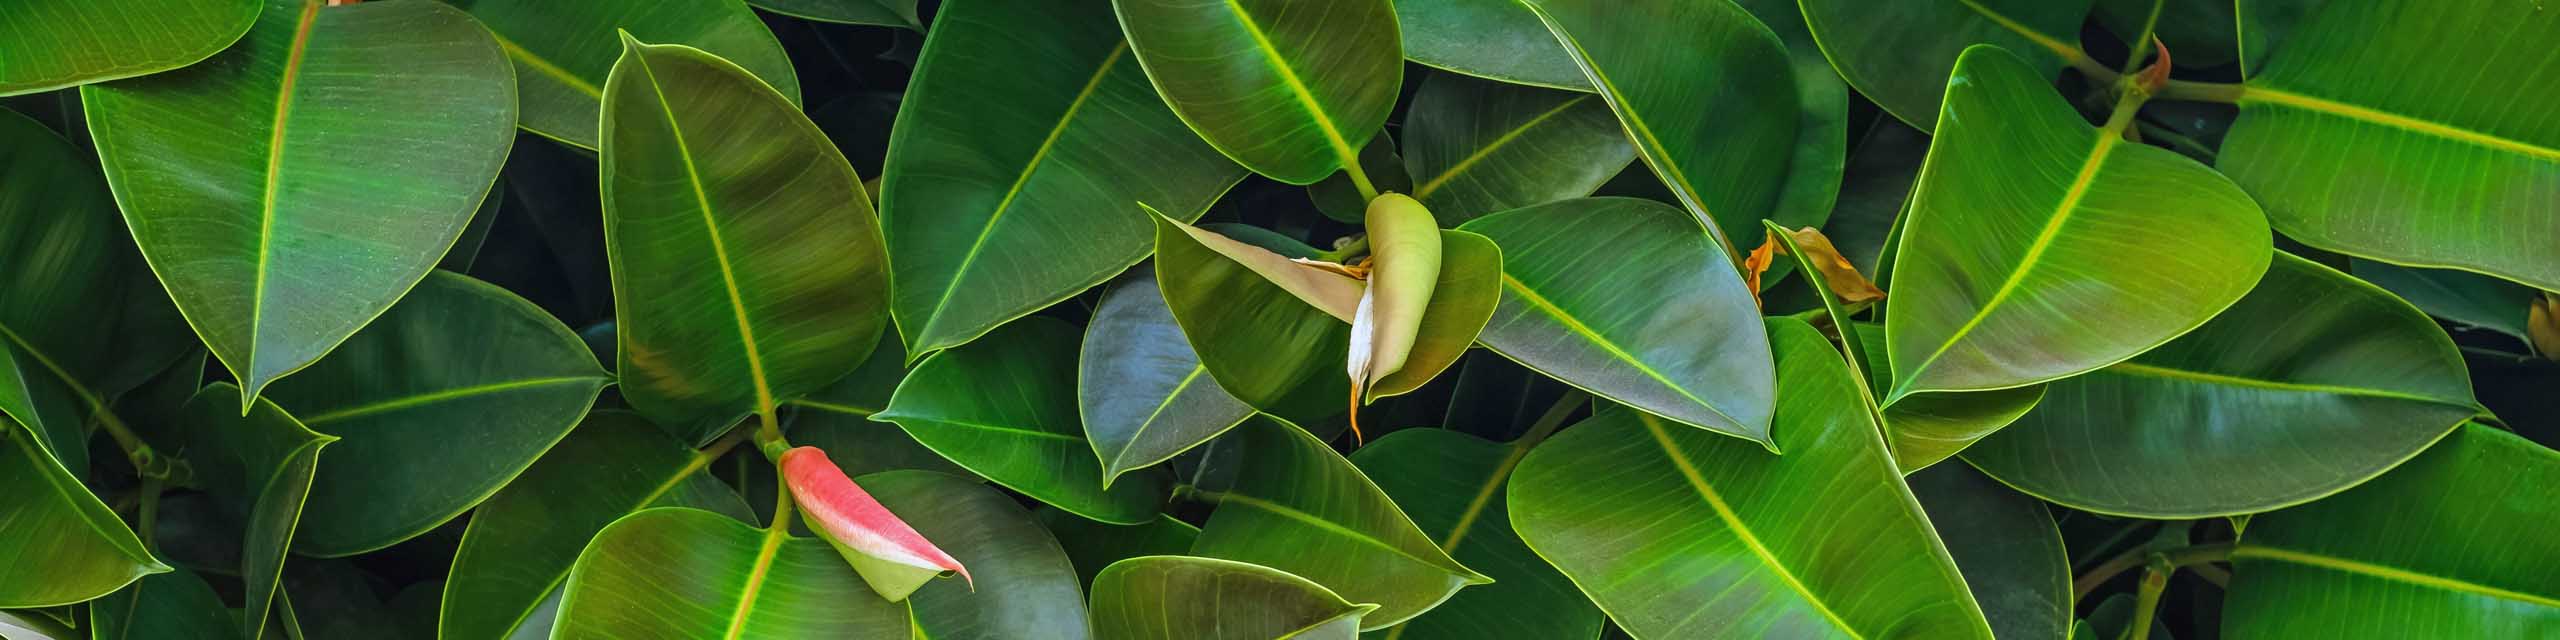 Close up of the leaves of rubber tree houseplants.